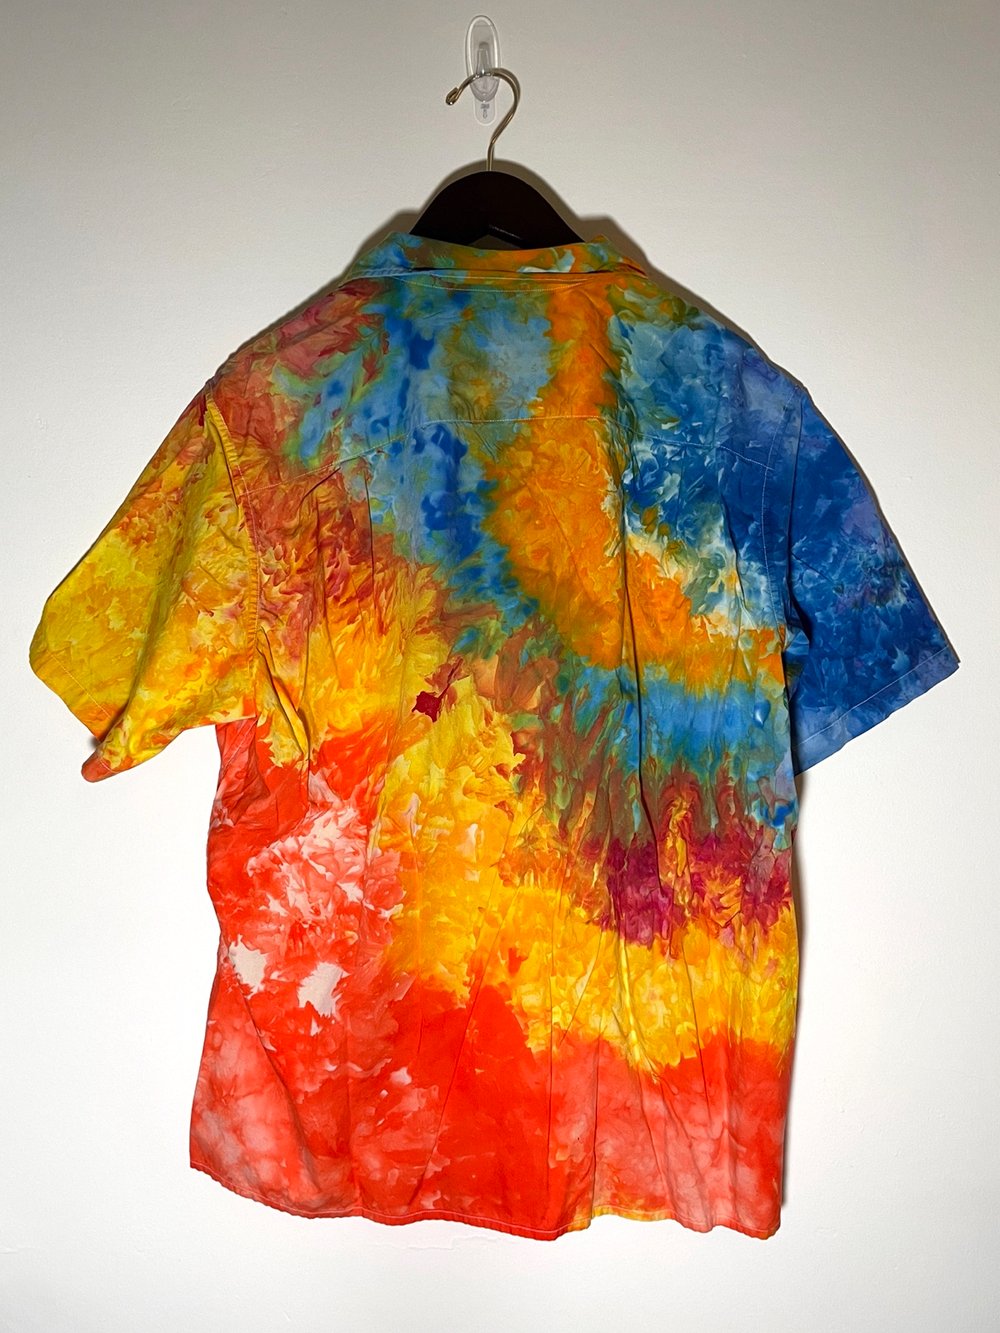 Tie Dye Button-up #21 - Extra Large